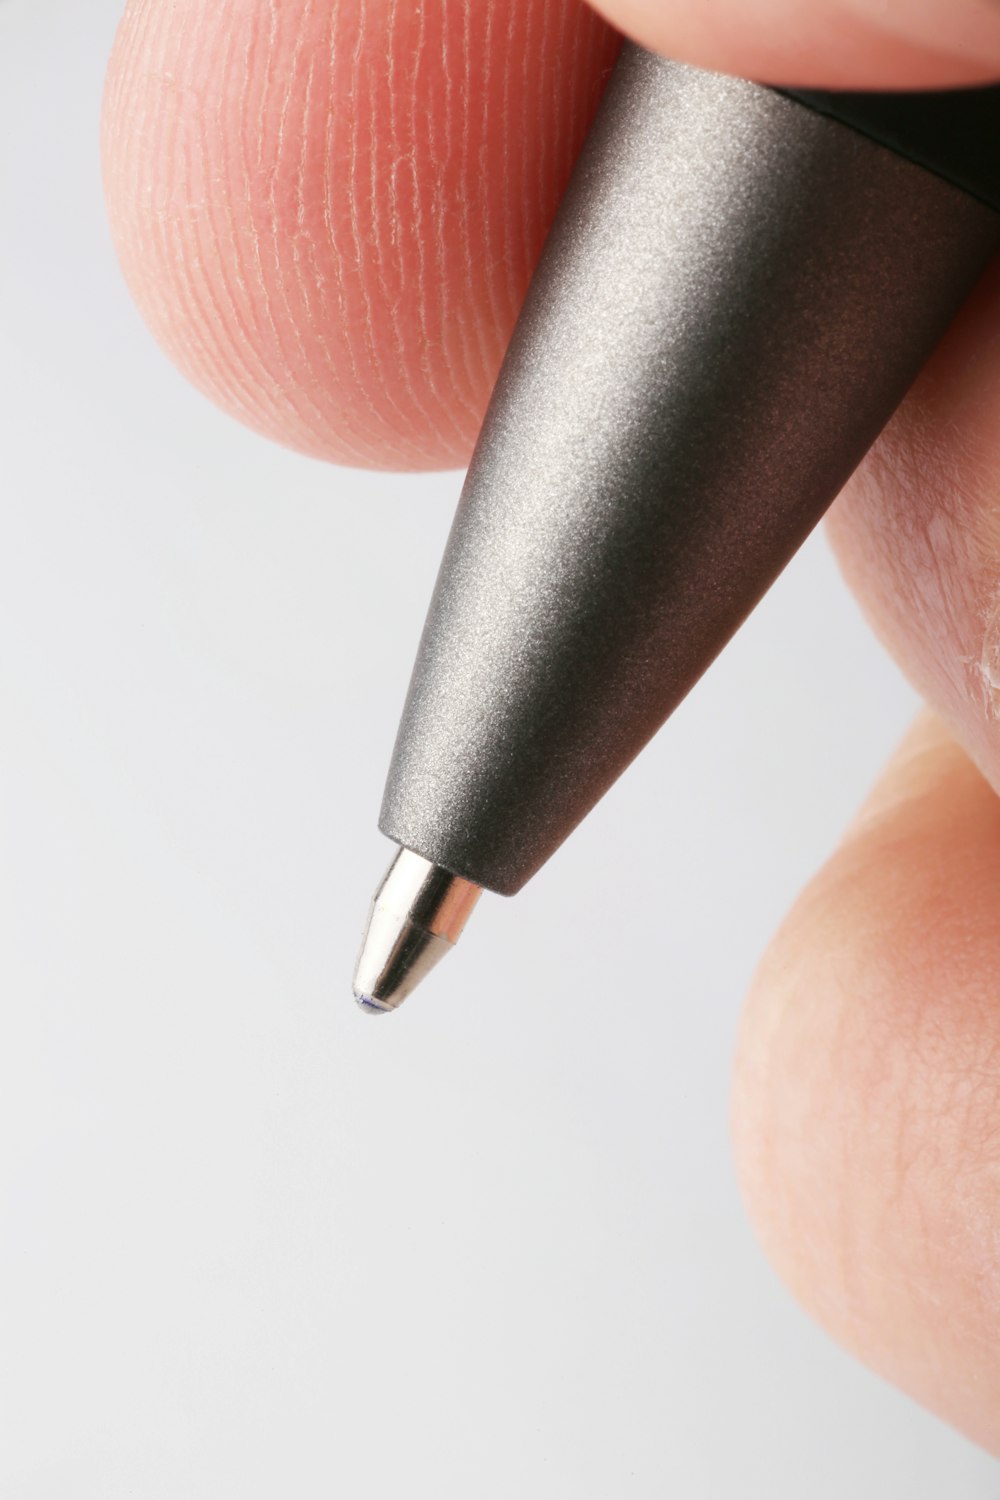 a close up of a person holding a pen